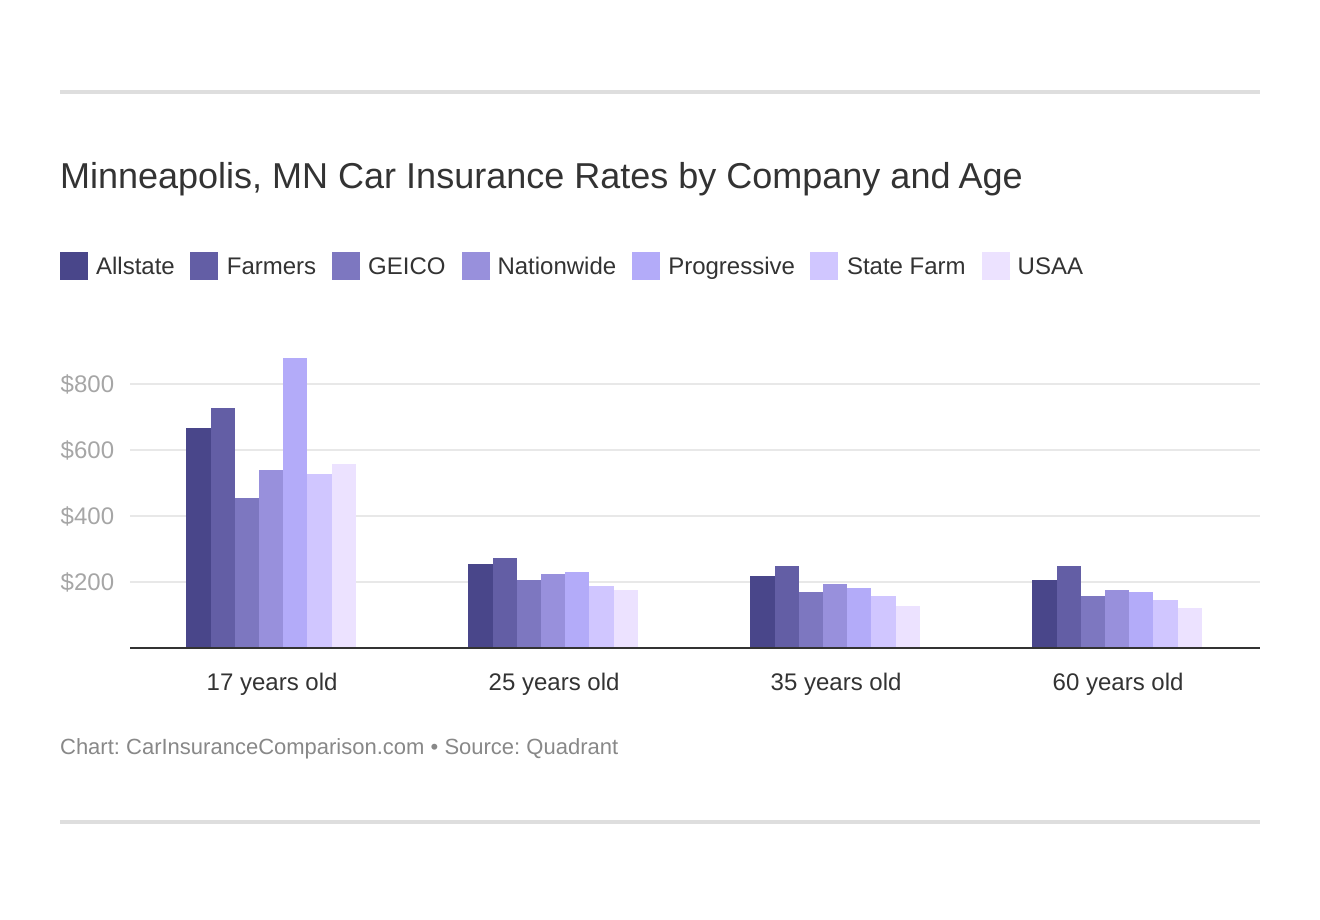 Minneapolis, MN Car Insurance Rates by Company and Age